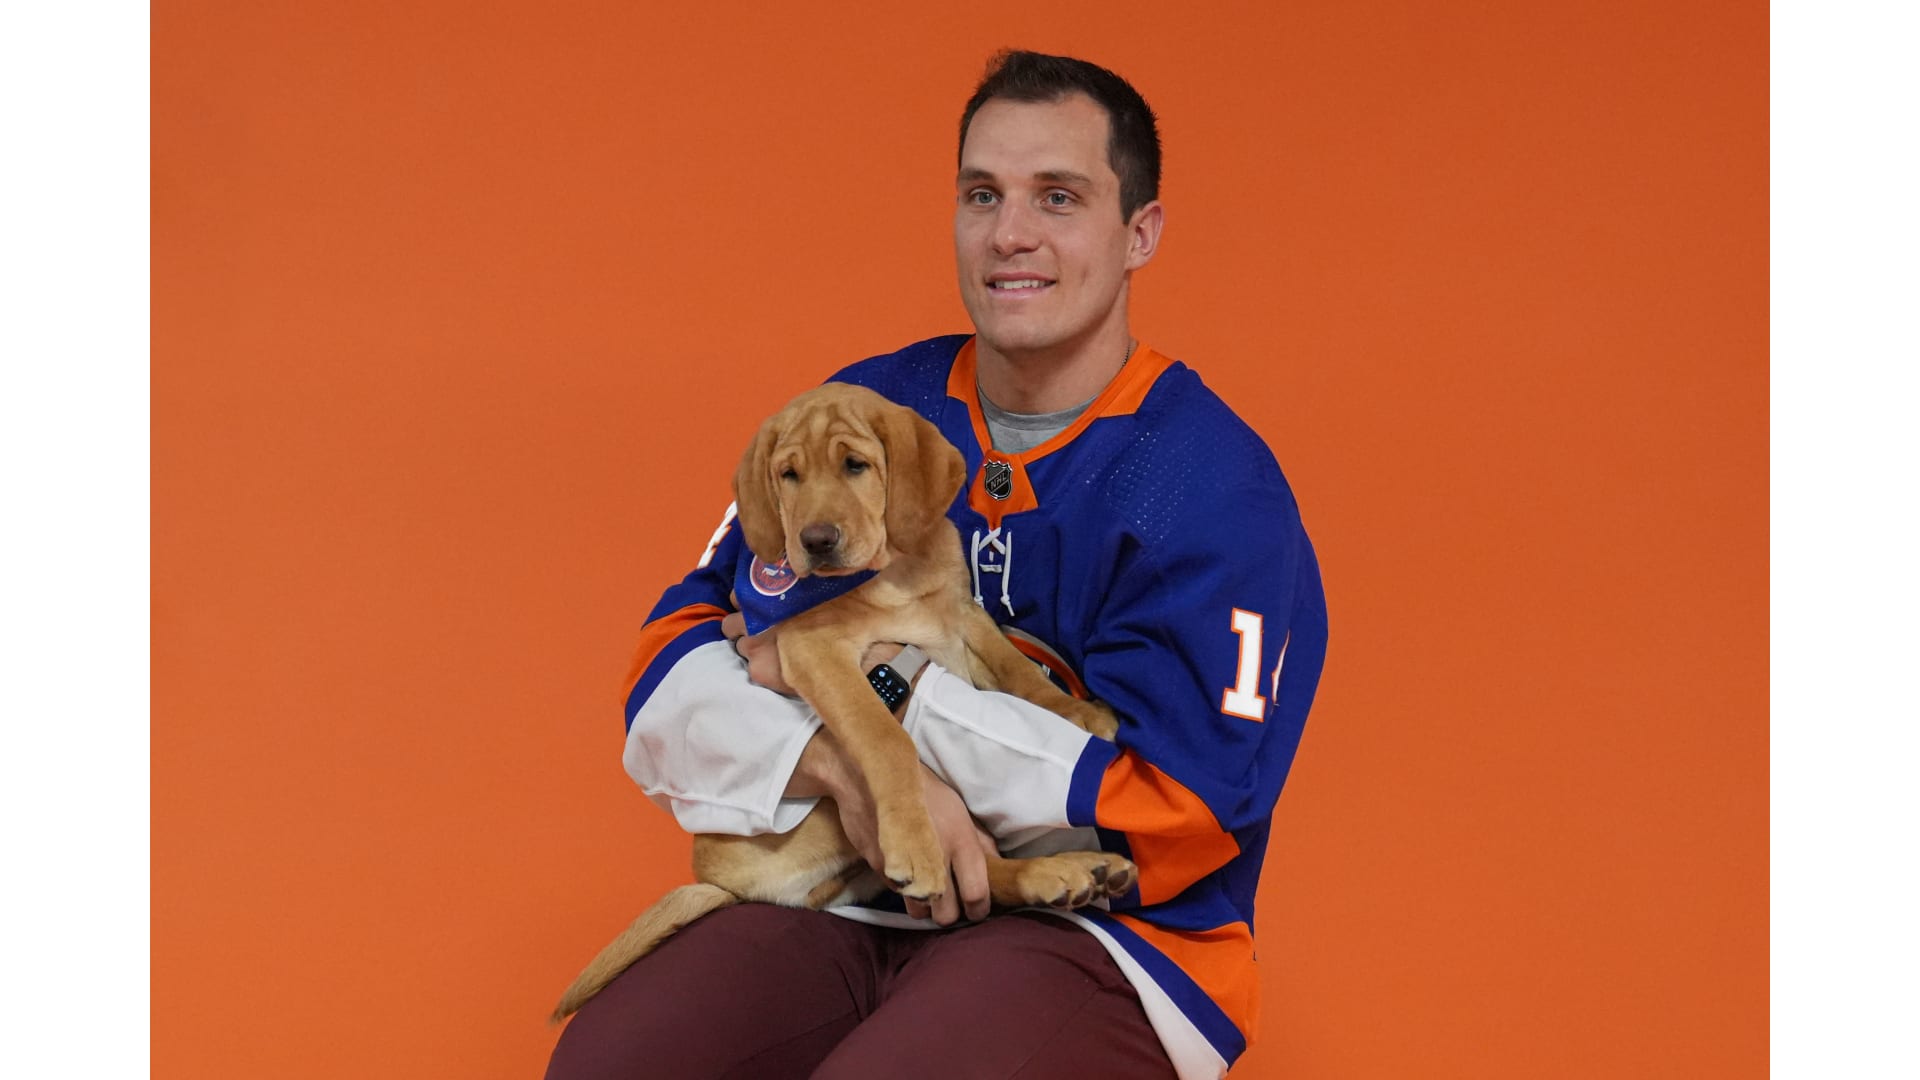 Islanders fans votes are in, the third New York Islanders' Puppy